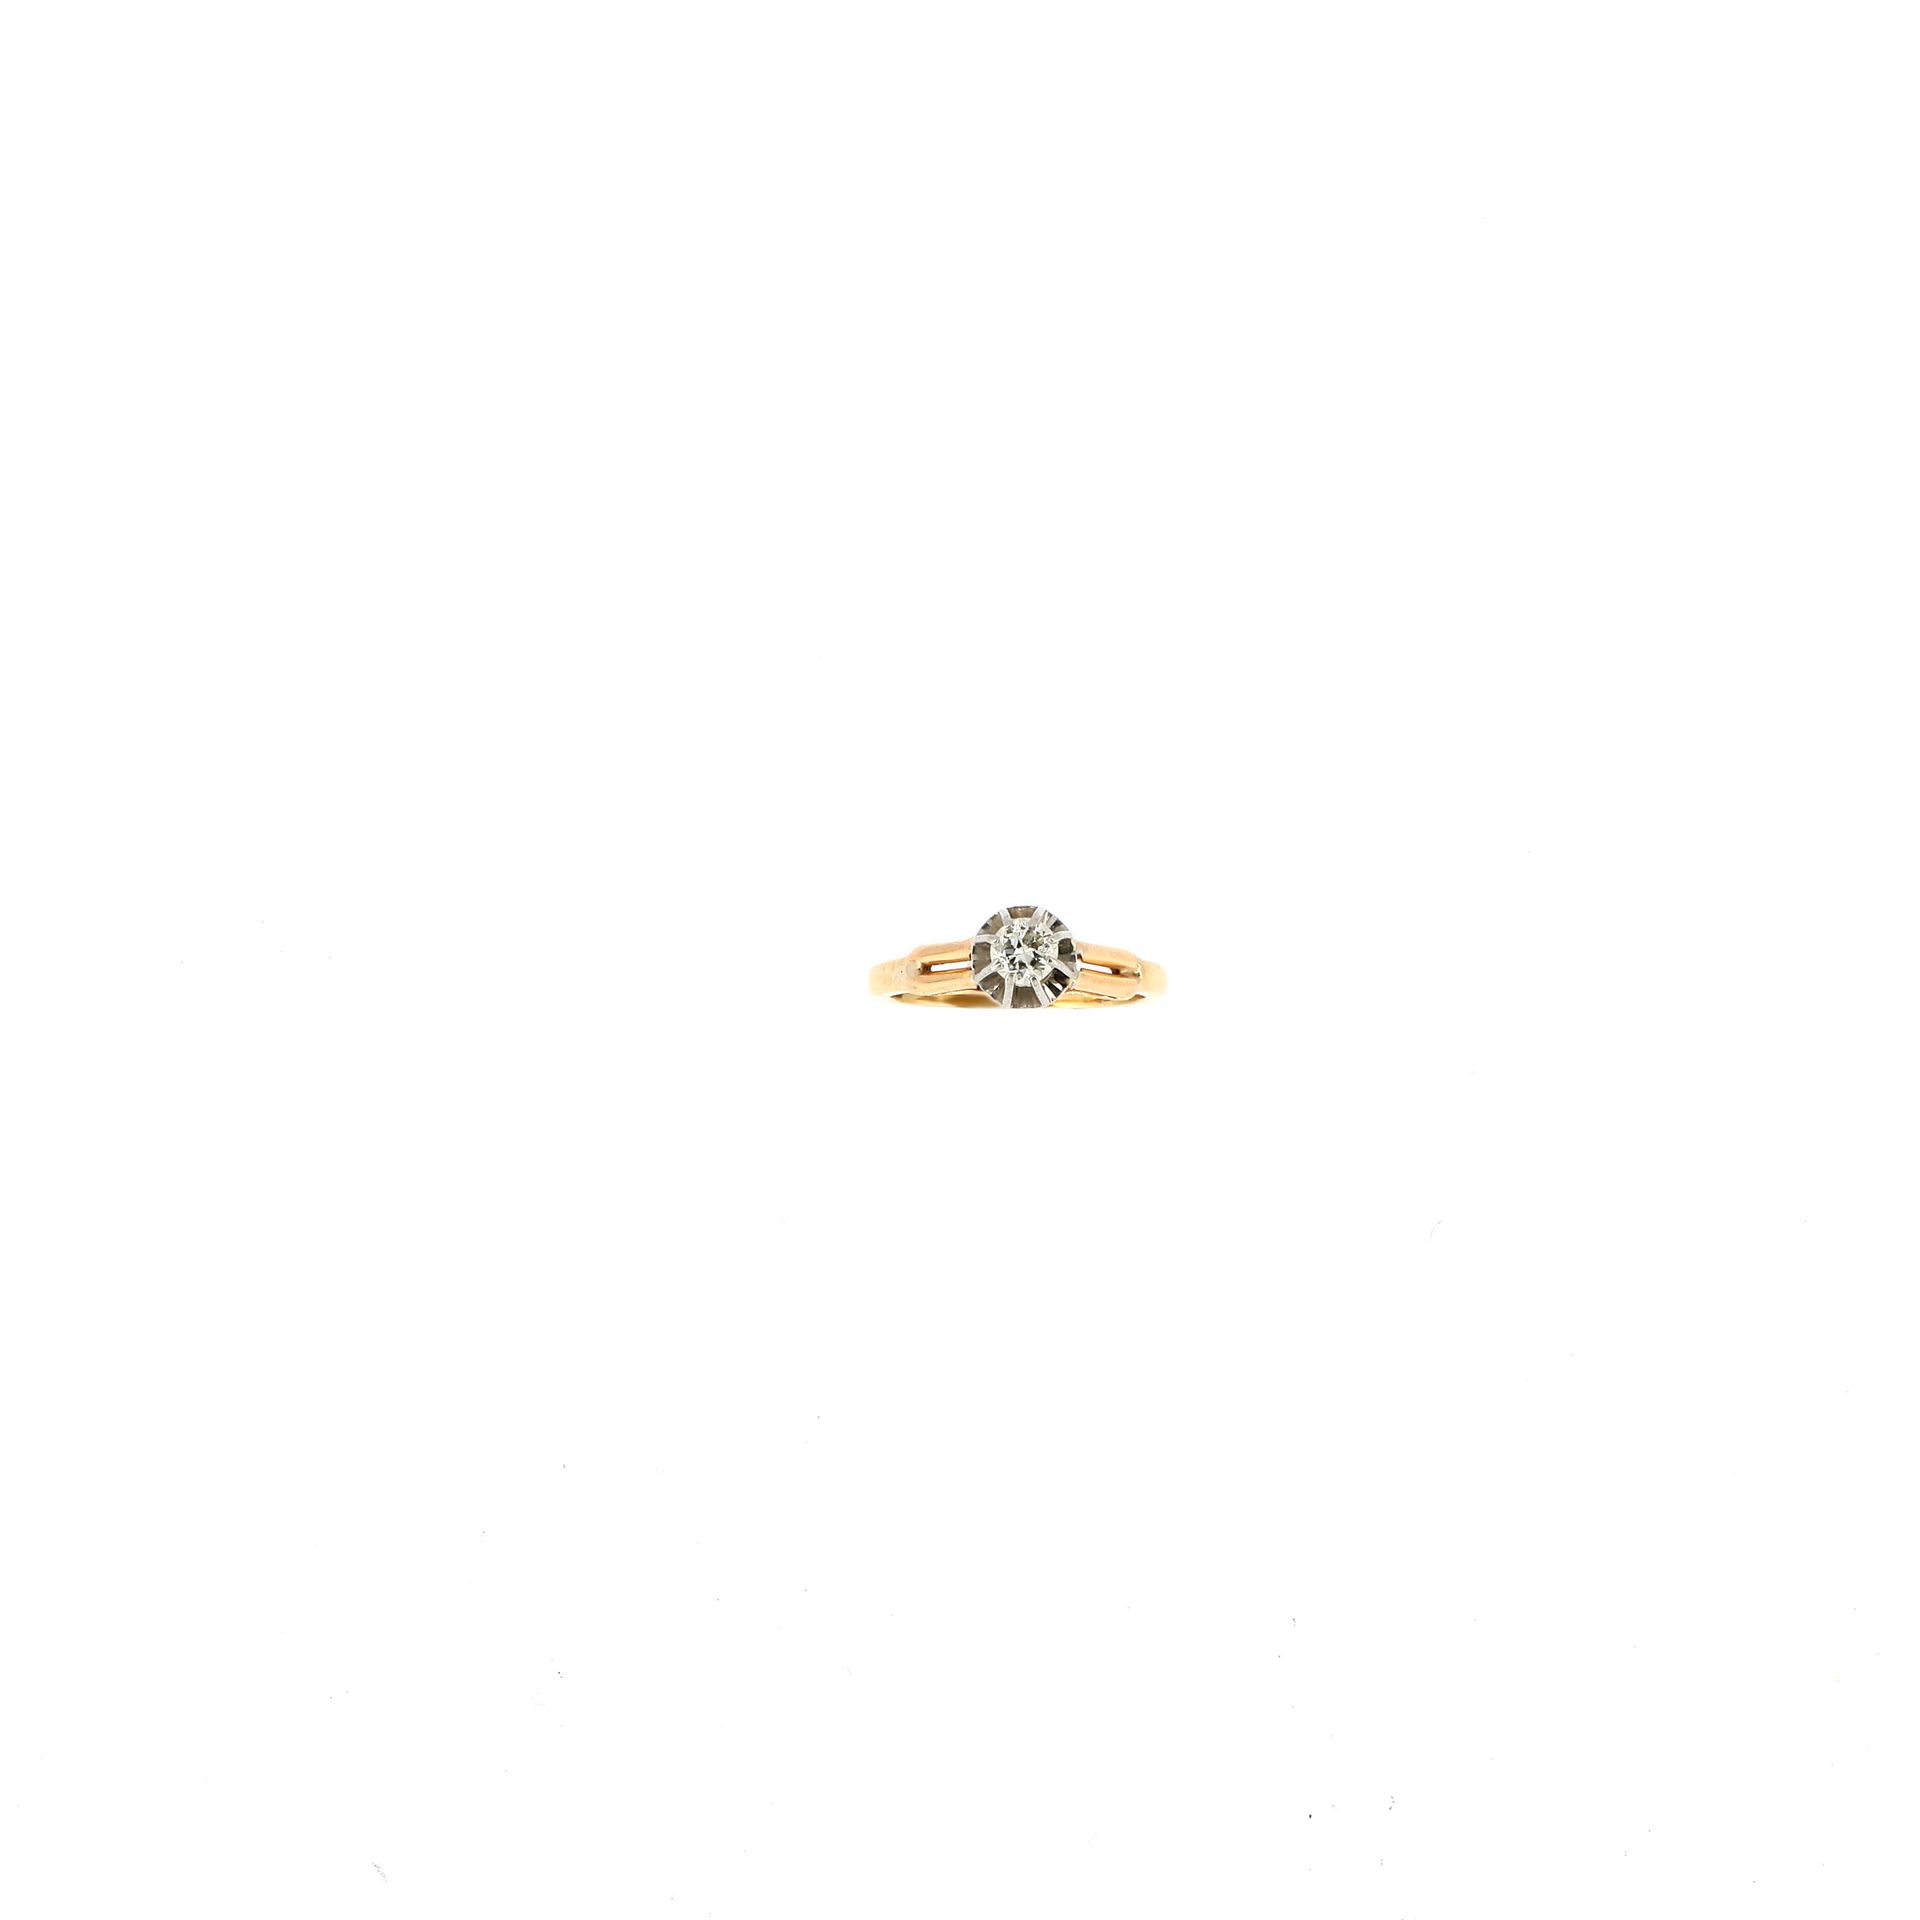 Null RING
in yellow gold, set with a round diamond on white gold.
A diamond and &hellip;